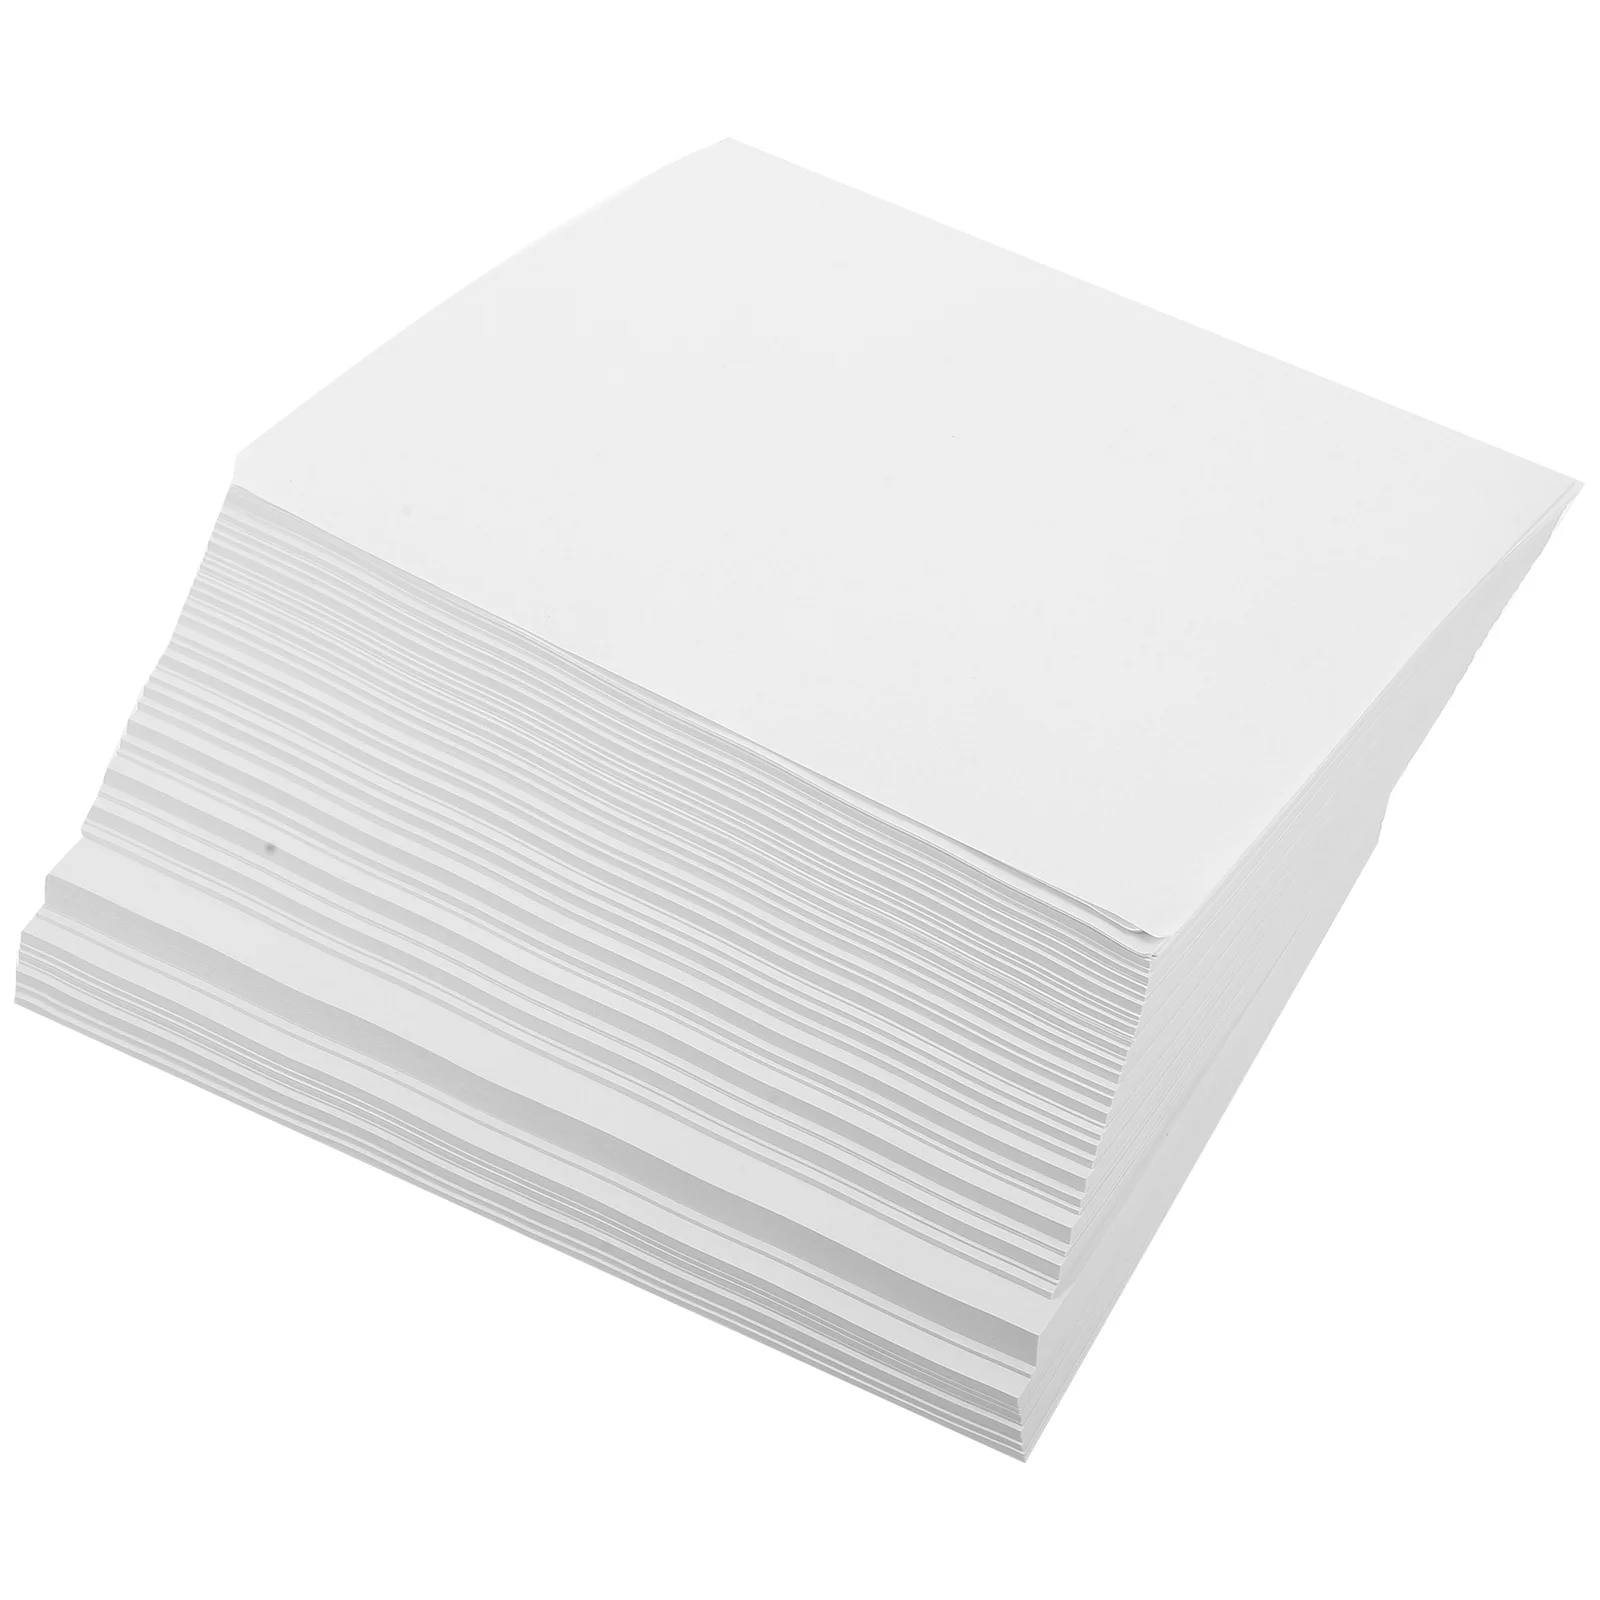 

500 Sheets A5 Copy Paper Blank Writing for Printer Cardboard Thick Printing Crafts DIY Child